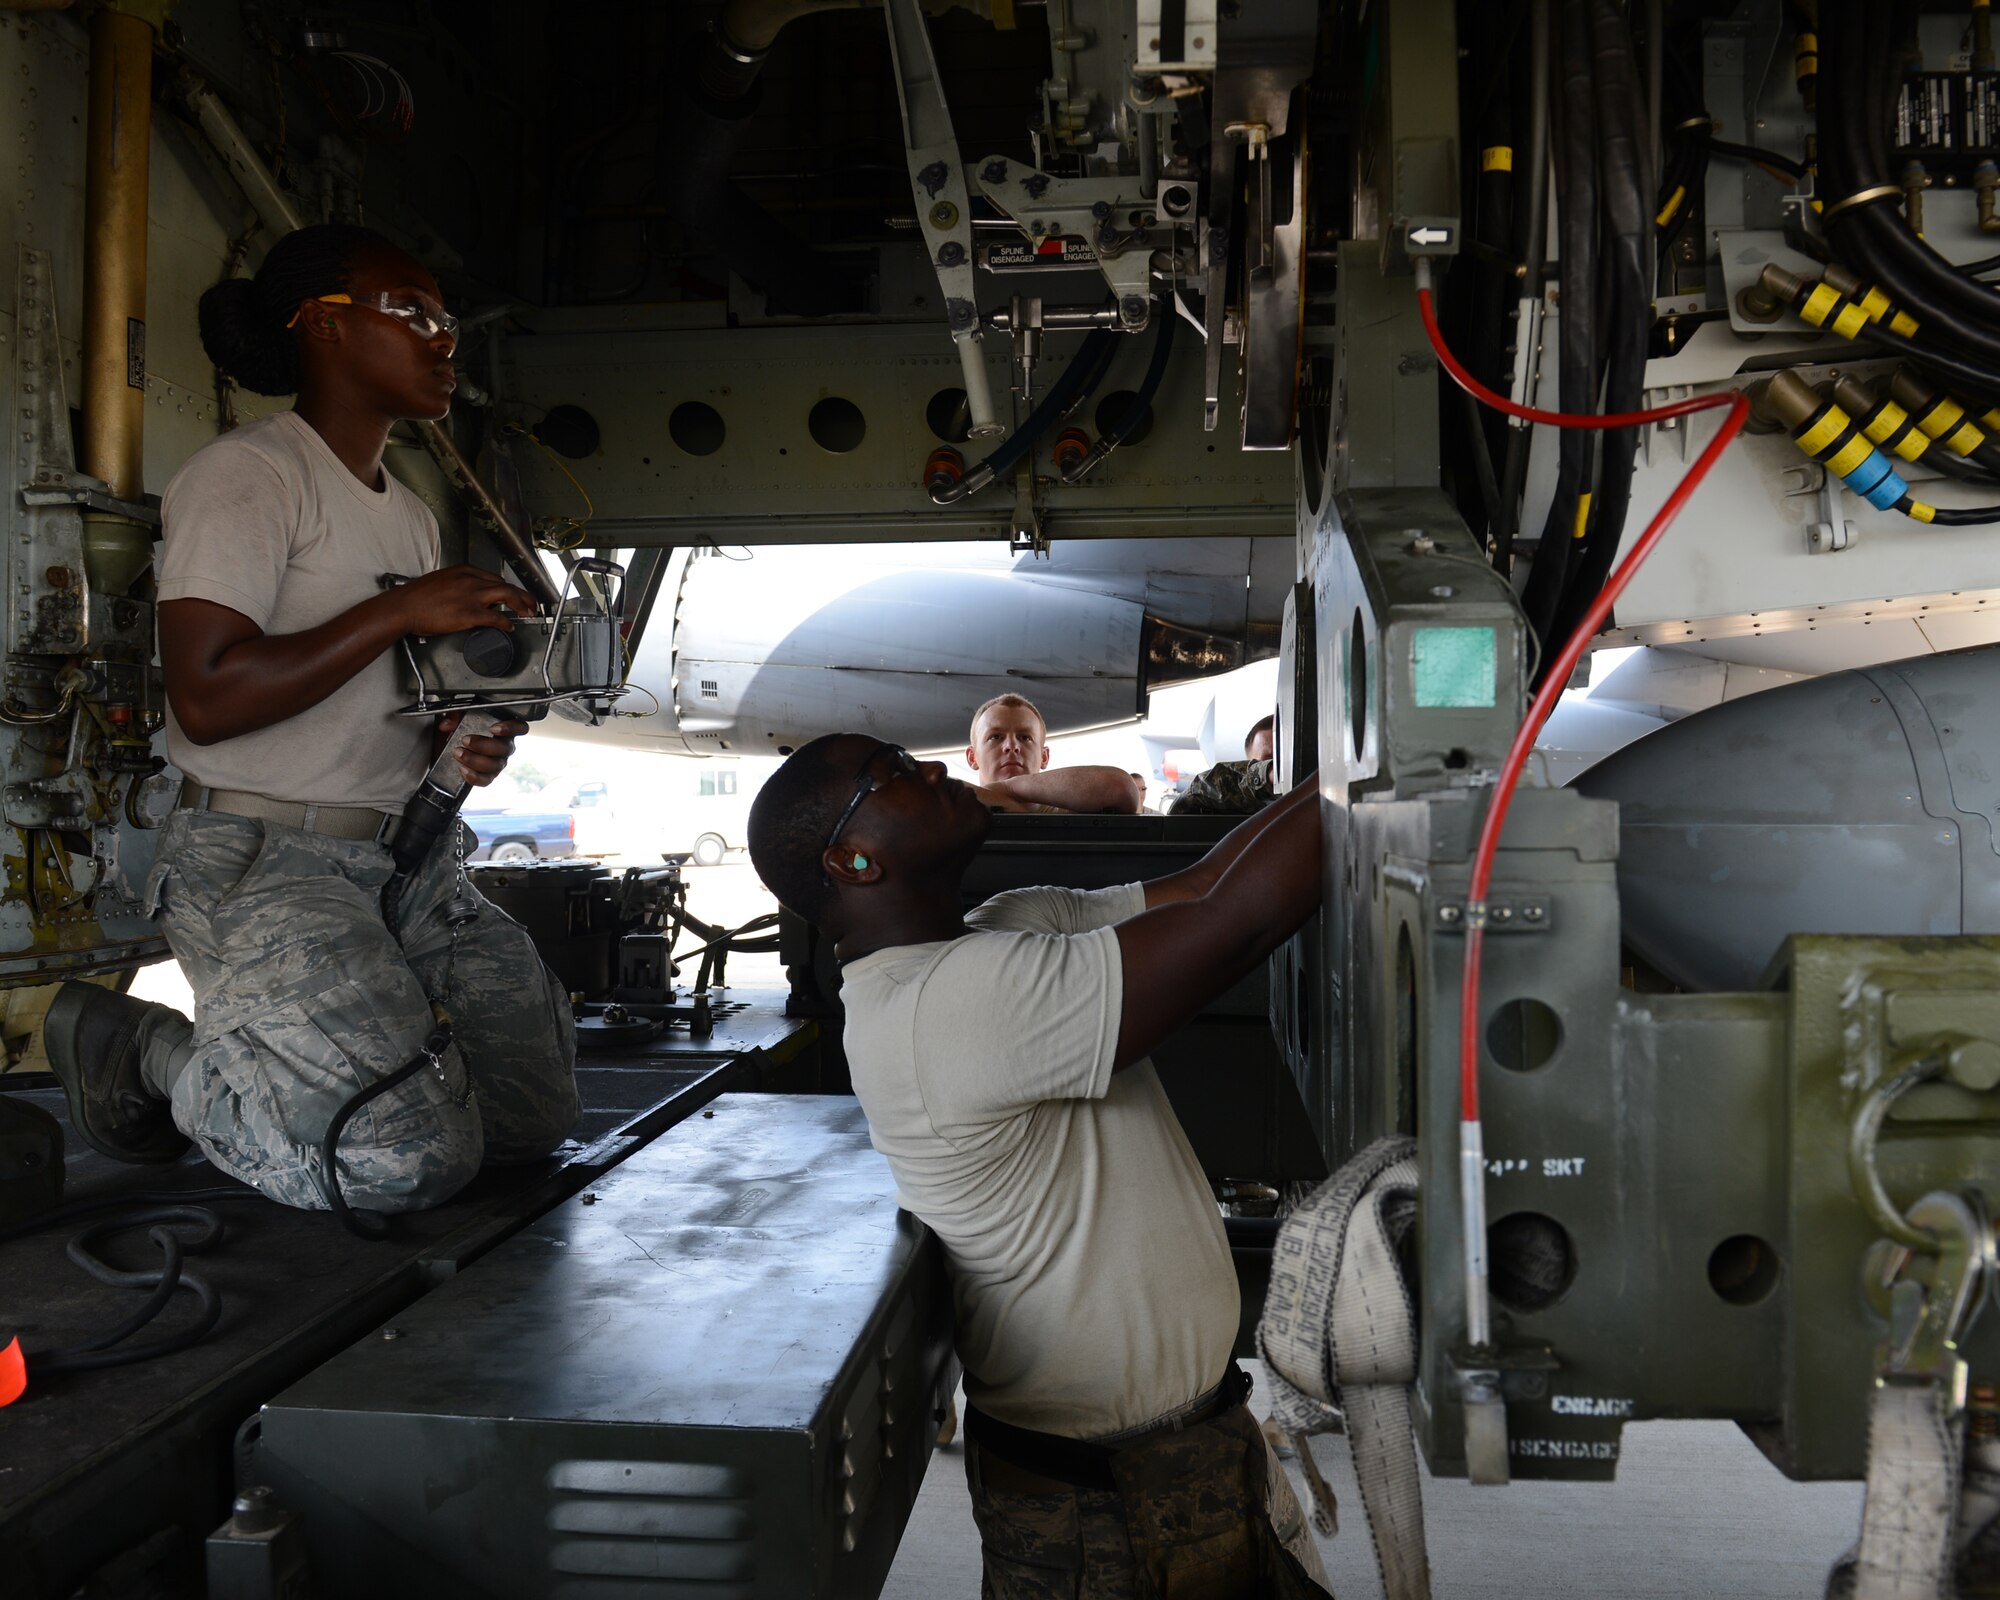 Weapons Loaders Senior Airman Breyana Anderson and Staff Sgt. Raymond Edgerson, position an unarmed AGM-86B Air-Launched Cruise Missile for loading into the bomb bay of a B-52H Stratofortress at Barksdale Air Force Base, Louisiana, Sept. 17, 2014. The weapon was flown and released Sept. 22 as part of the Nuclear Weapons System Evaluation Program – an end-to-end operational evaluation of 8th Air Force and Task Force 204’s ability to deliver an ALCM from storage to its final target. (Photo by Senior Airman Benjamin Gonsier)